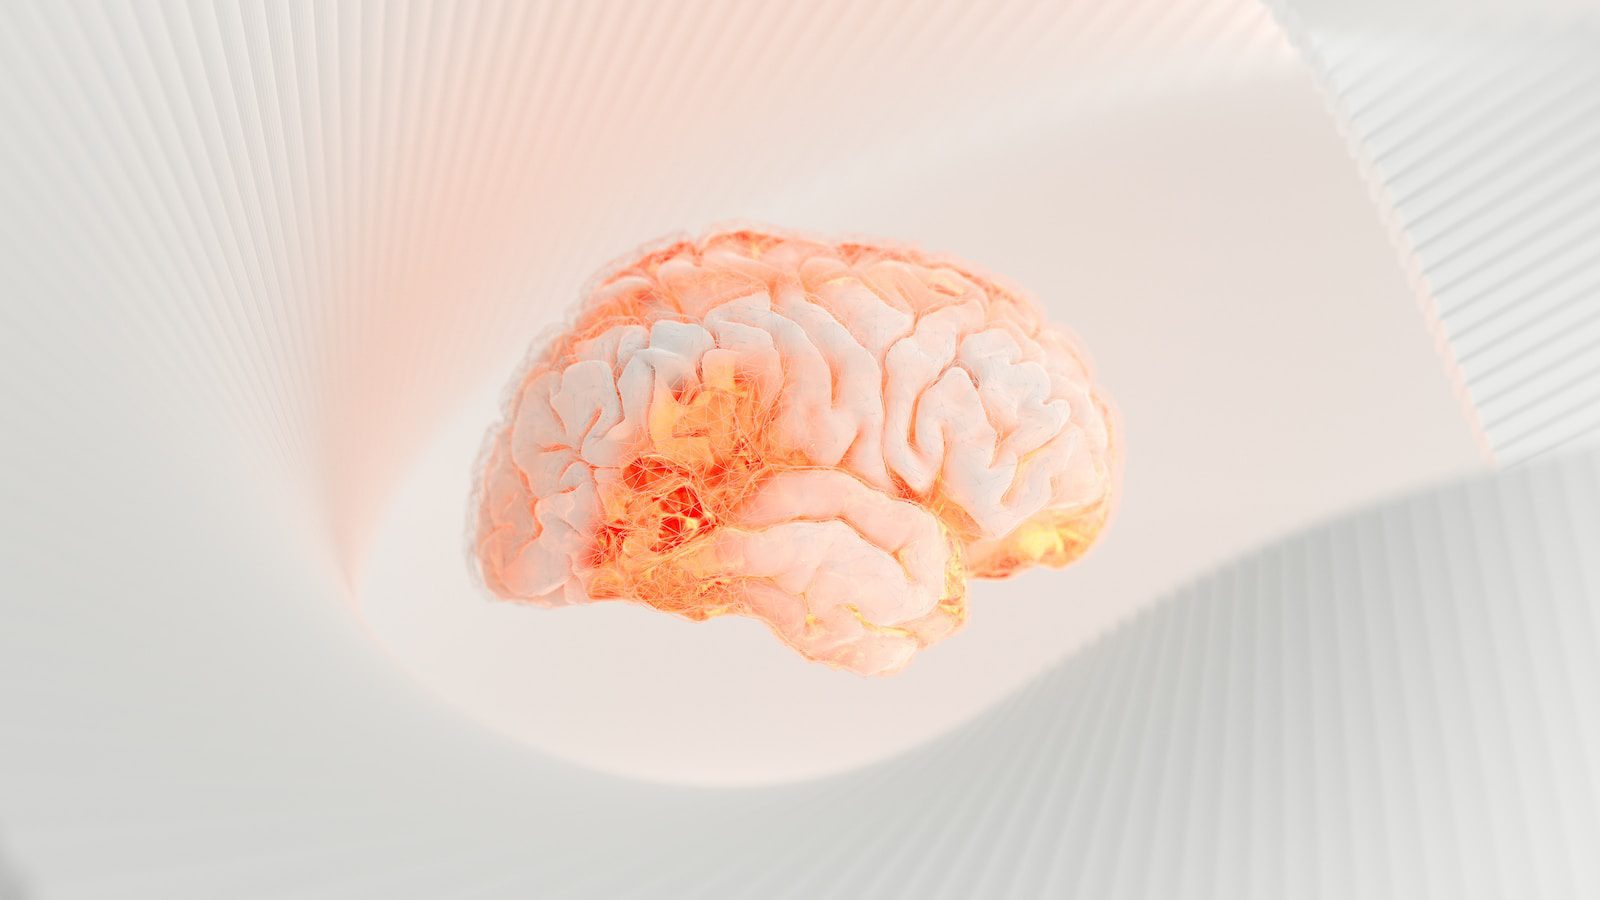 Close-up of a human brain representing neuroscience-driven coaching, brain-based coaching, and the connection between neuroplasticity and mental health.